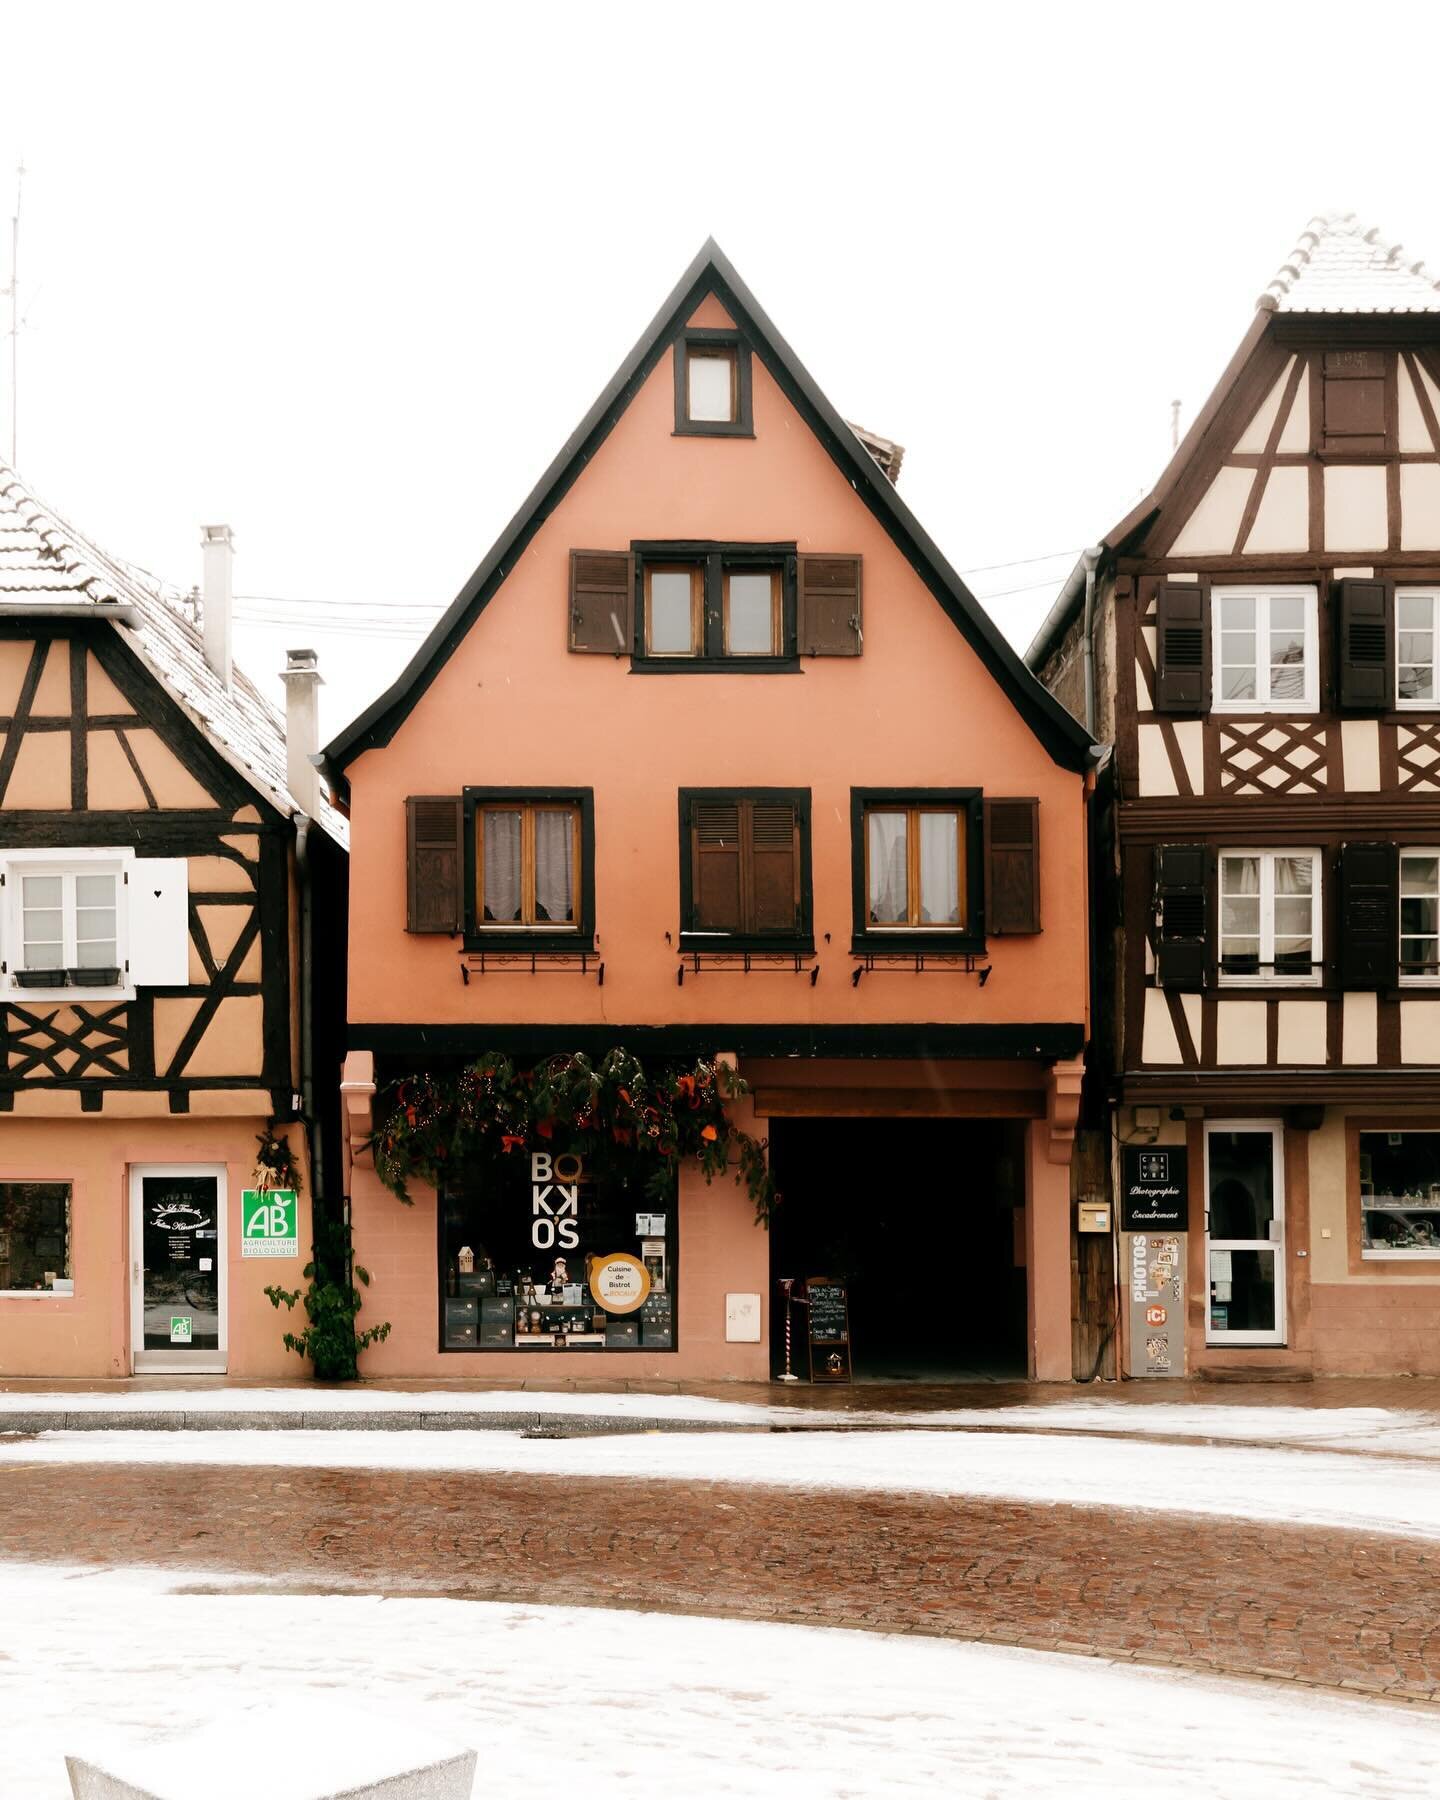 From a snowy winter&rsquo;s day in Obernai, France.